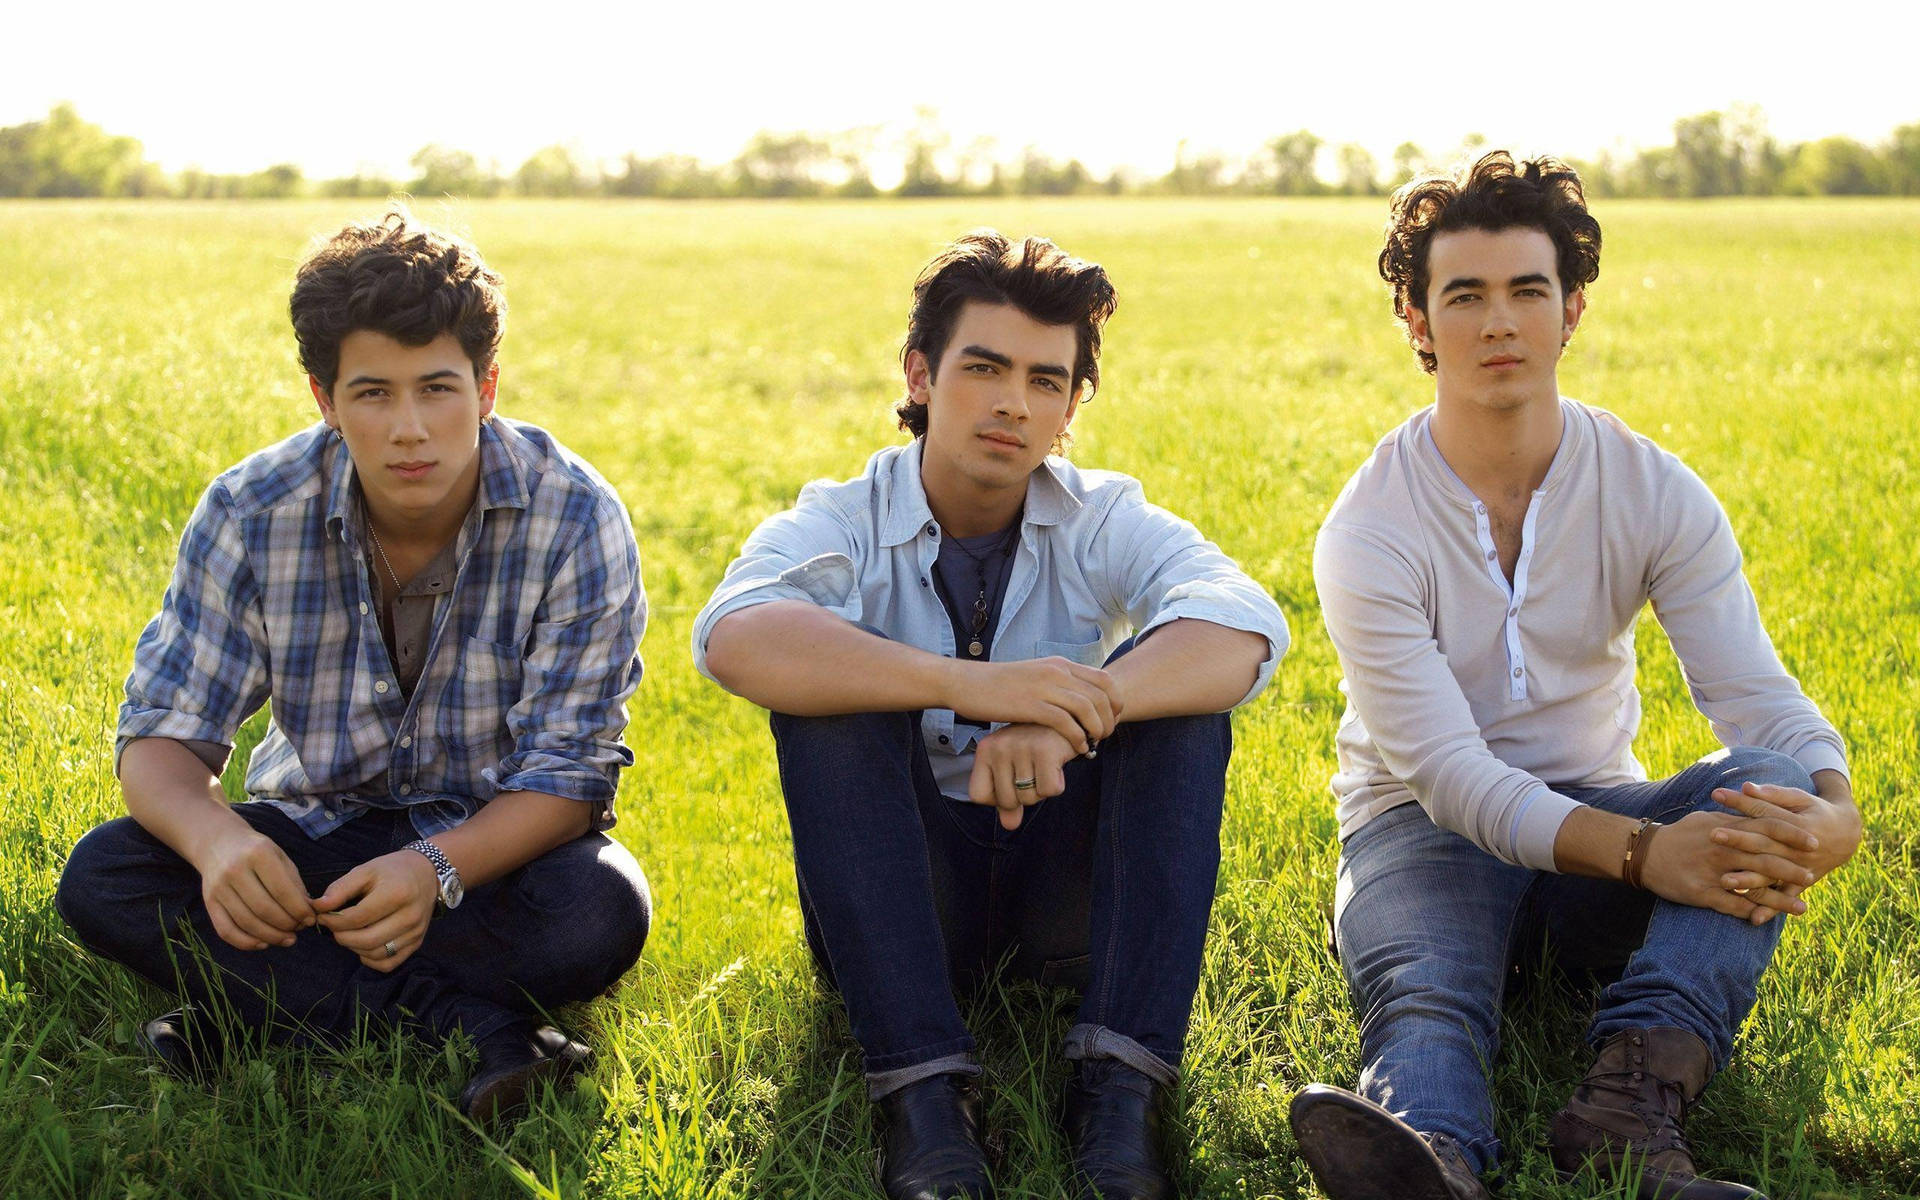 Young Jonas Brothers On Grass Background